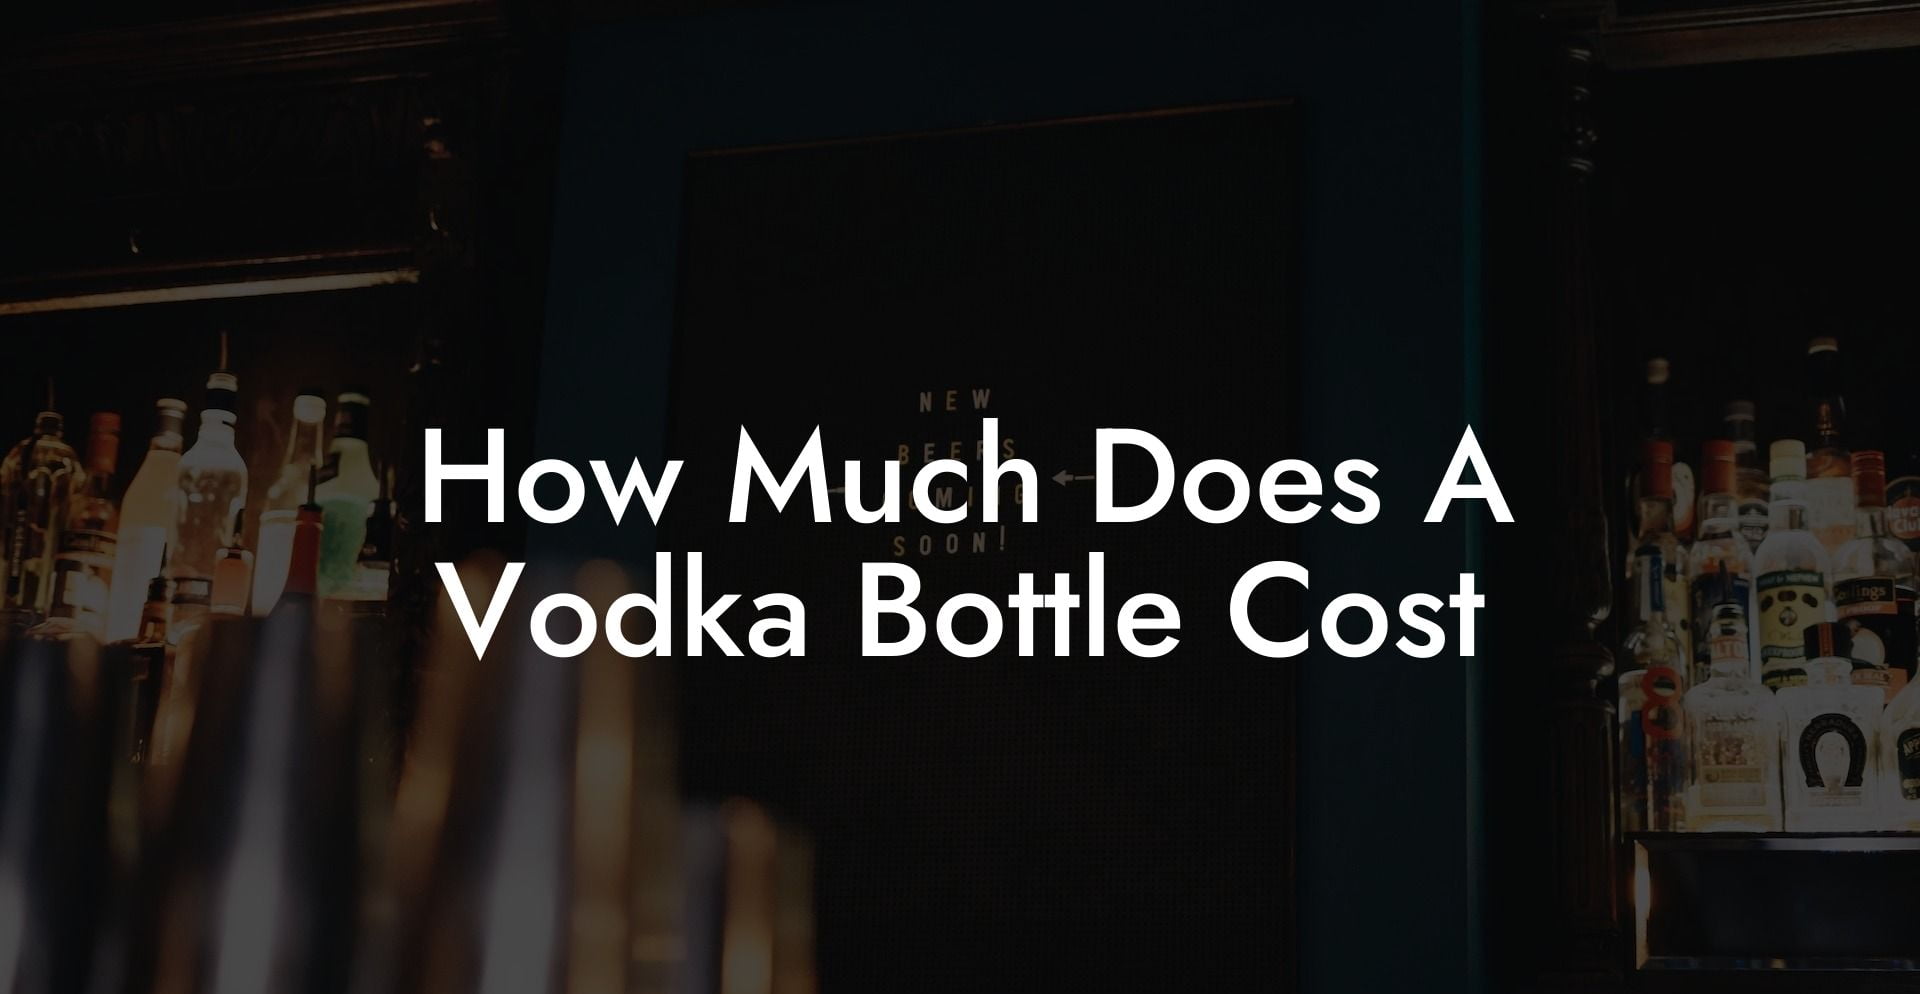 How Much Does A Vodka Bottle Cost